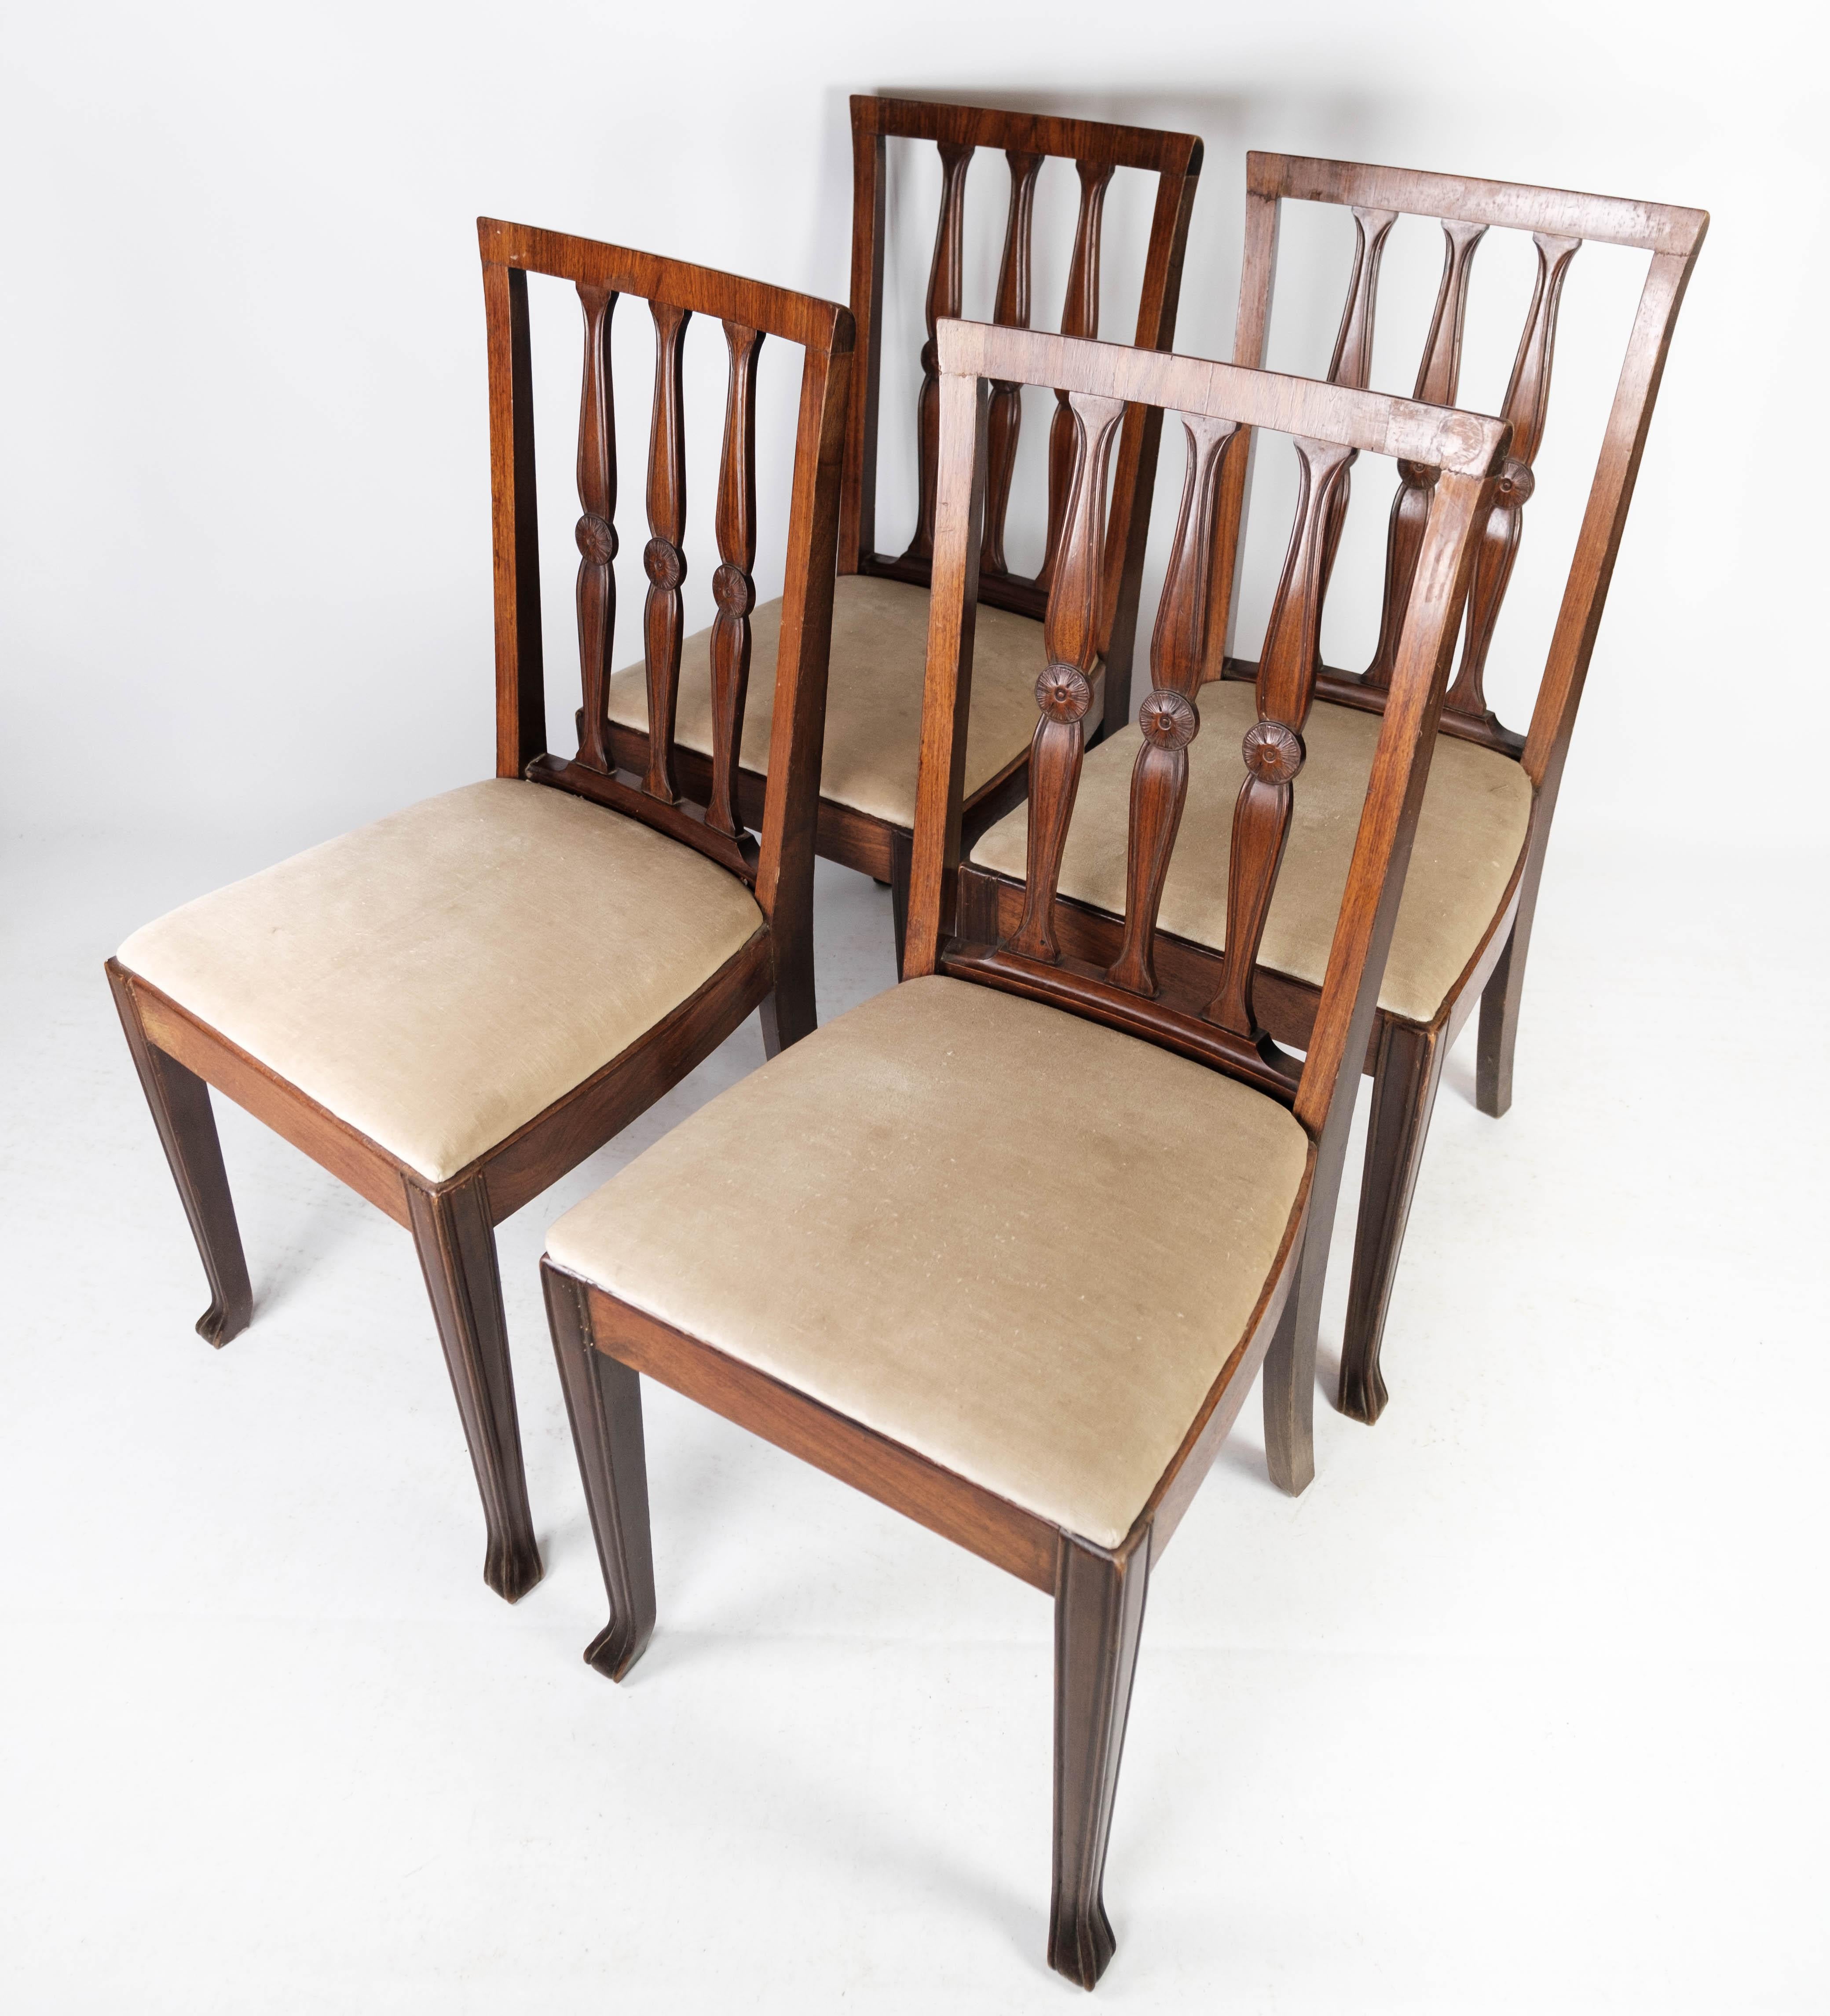 Other Set of Four Dining Room Chairs in Rosewood, 1920s For Sale